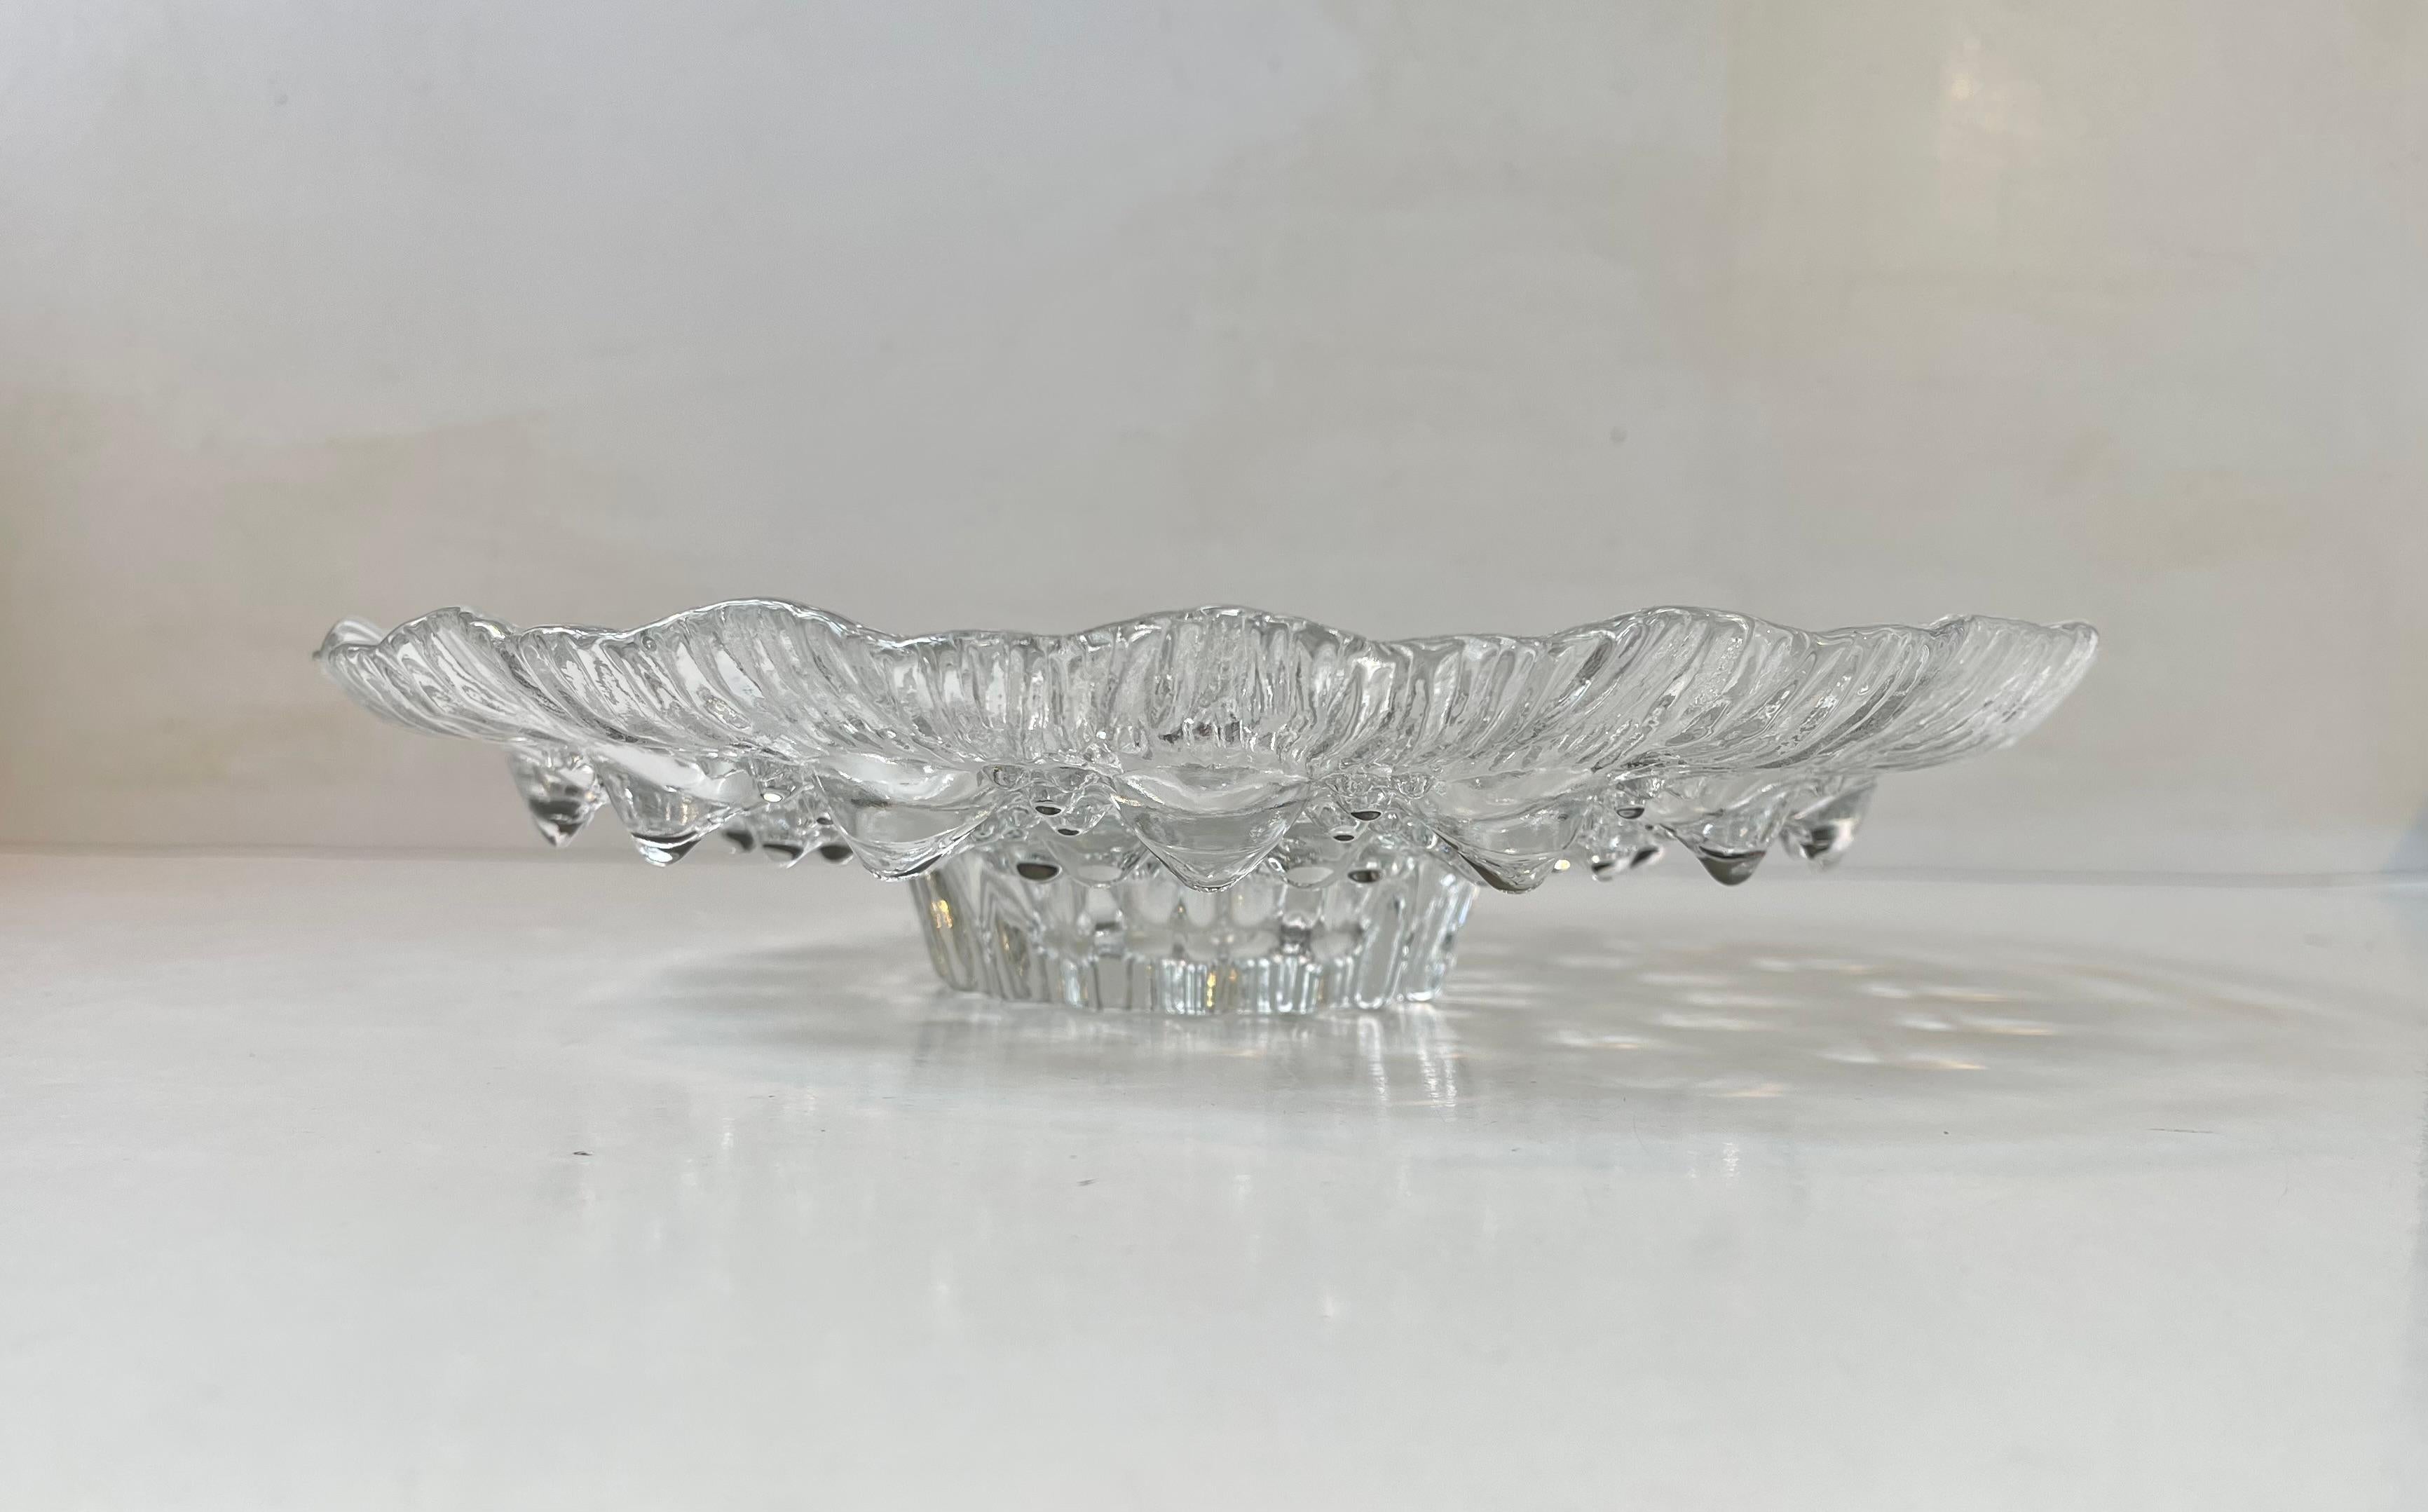 Astonishing footed dish or cake stand I 'dripping' ice glass. Design by Pertti Santalahti for Kumela in Finland circa 1970. Its a heavy piece with thich base. Measurements: D: 25.5 cm, H: 5 cm.

Wellkept, clean and intact condition.

Free World wide